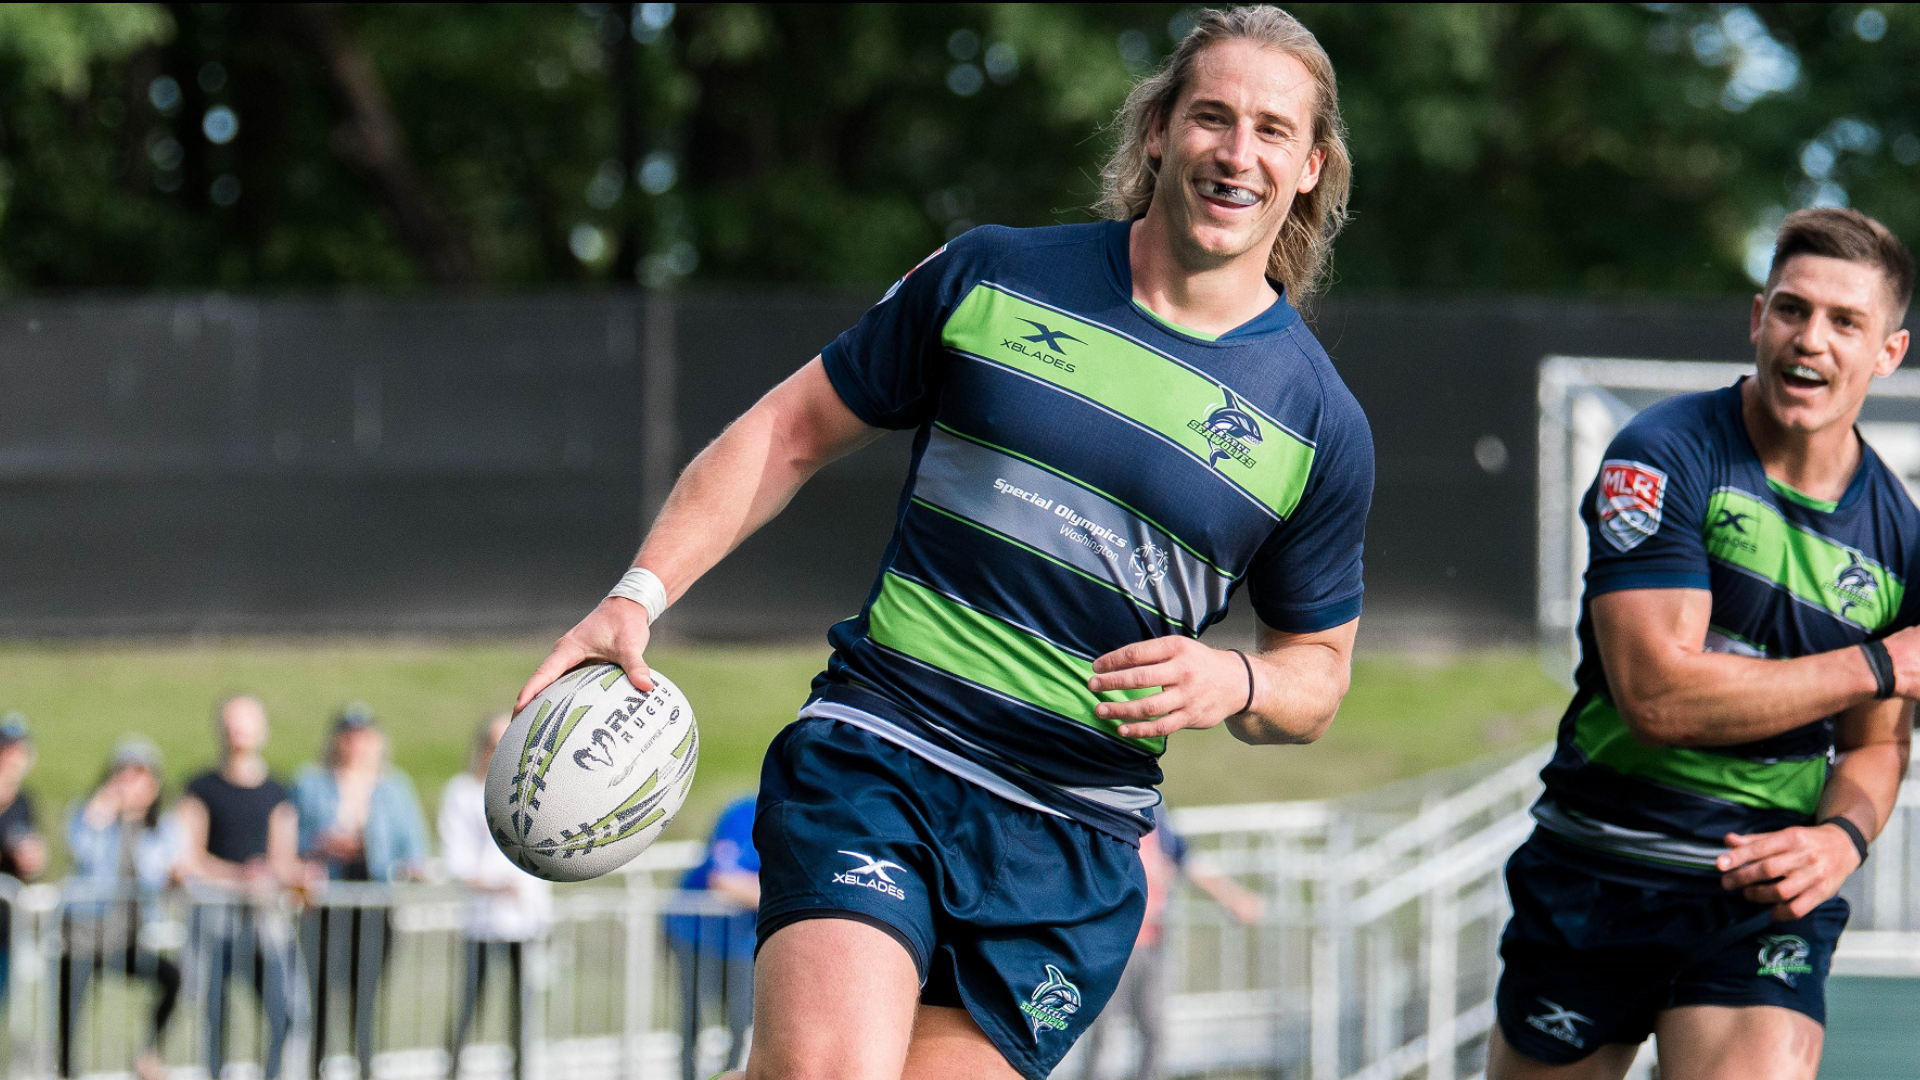 The Seattle Seawolves get ready to defend their rugby championship title king5